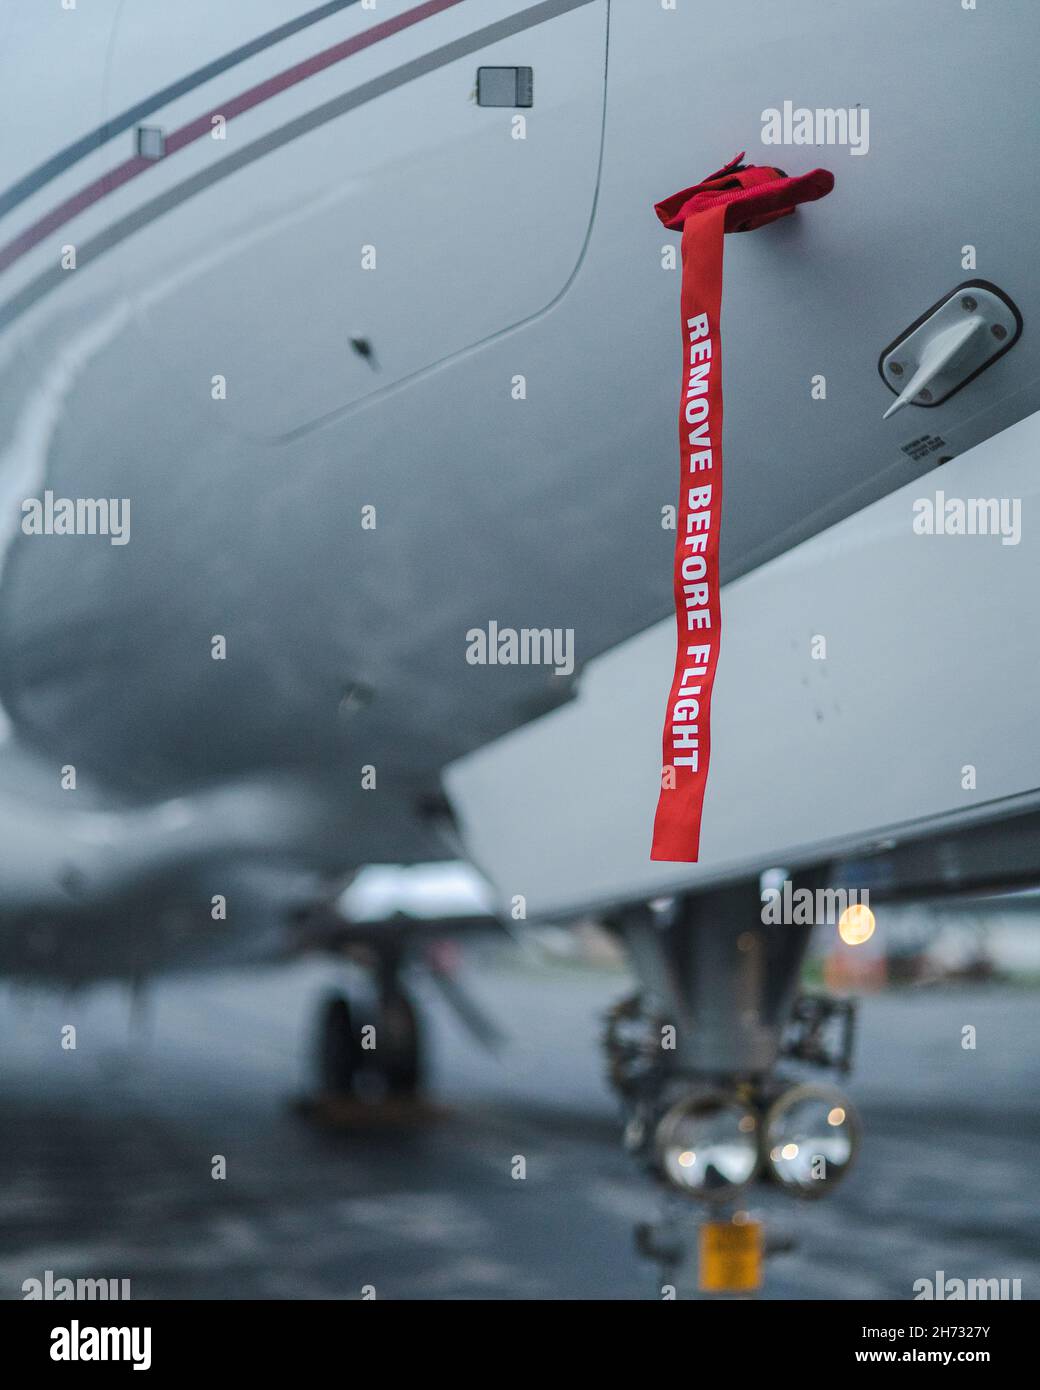 Remove before flight tags - Stock Image - C039/4880 - Science